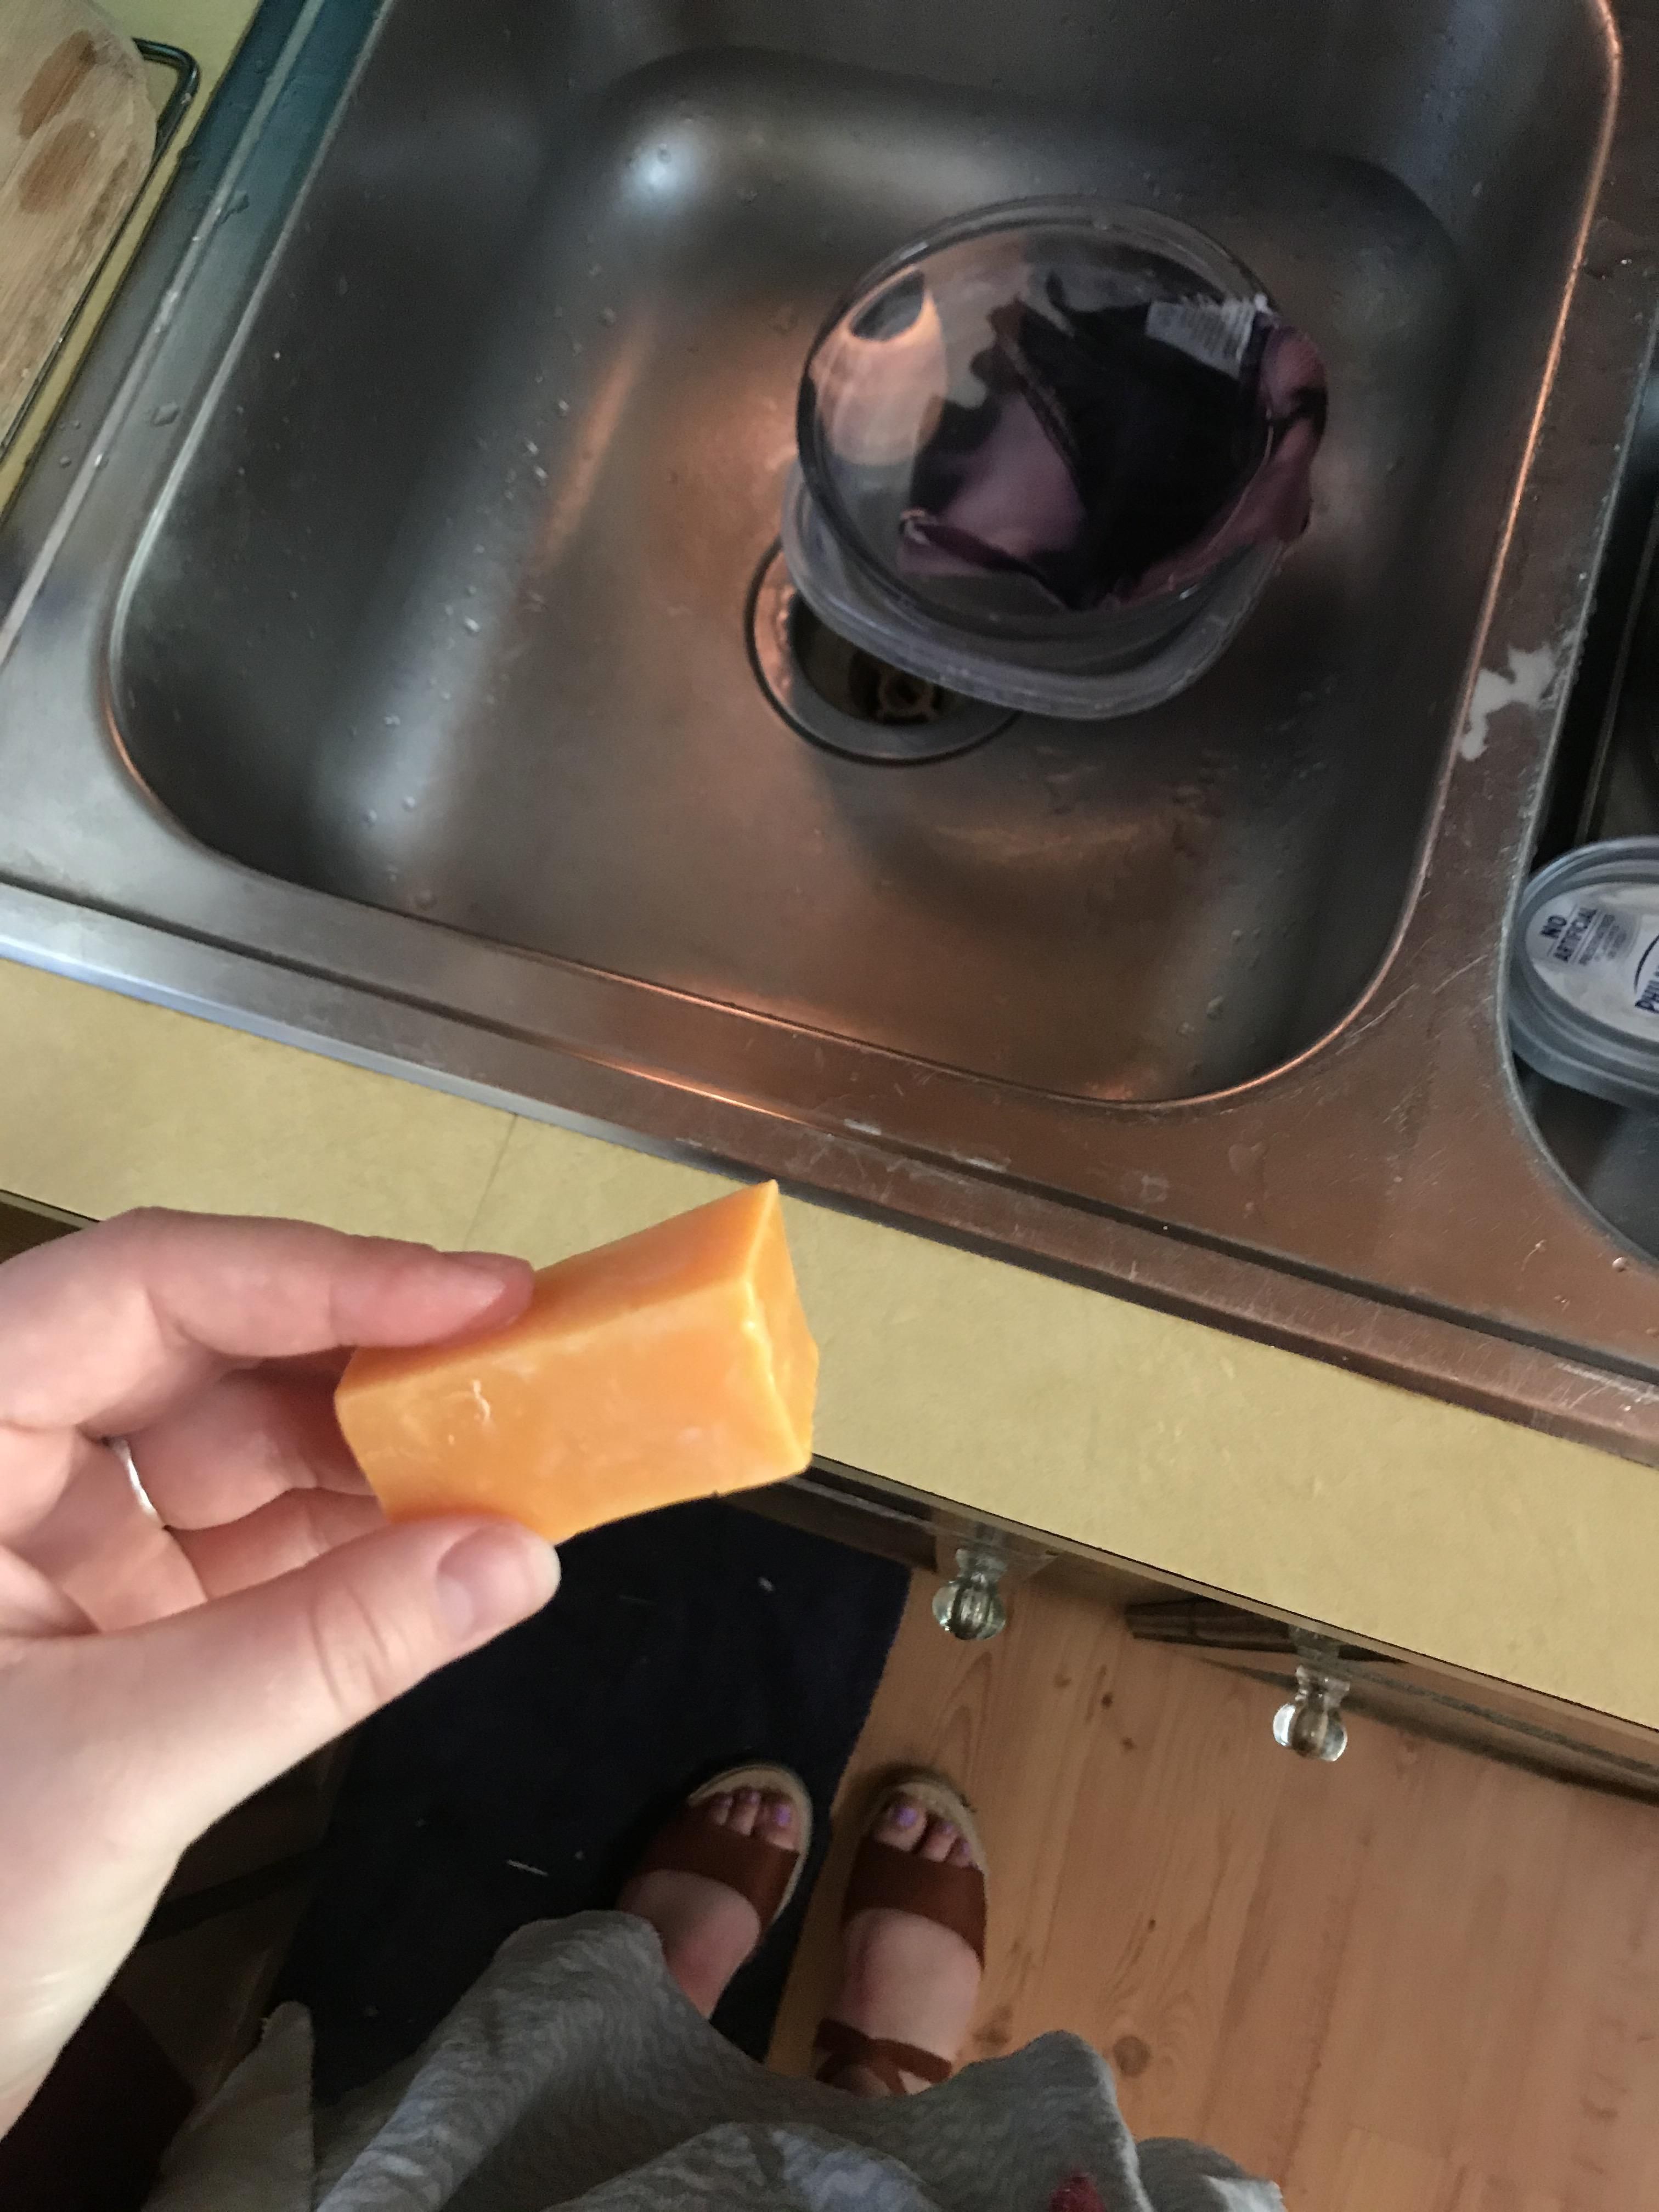 Just realized my soap wasn’t working because it’s literally a block of cheese